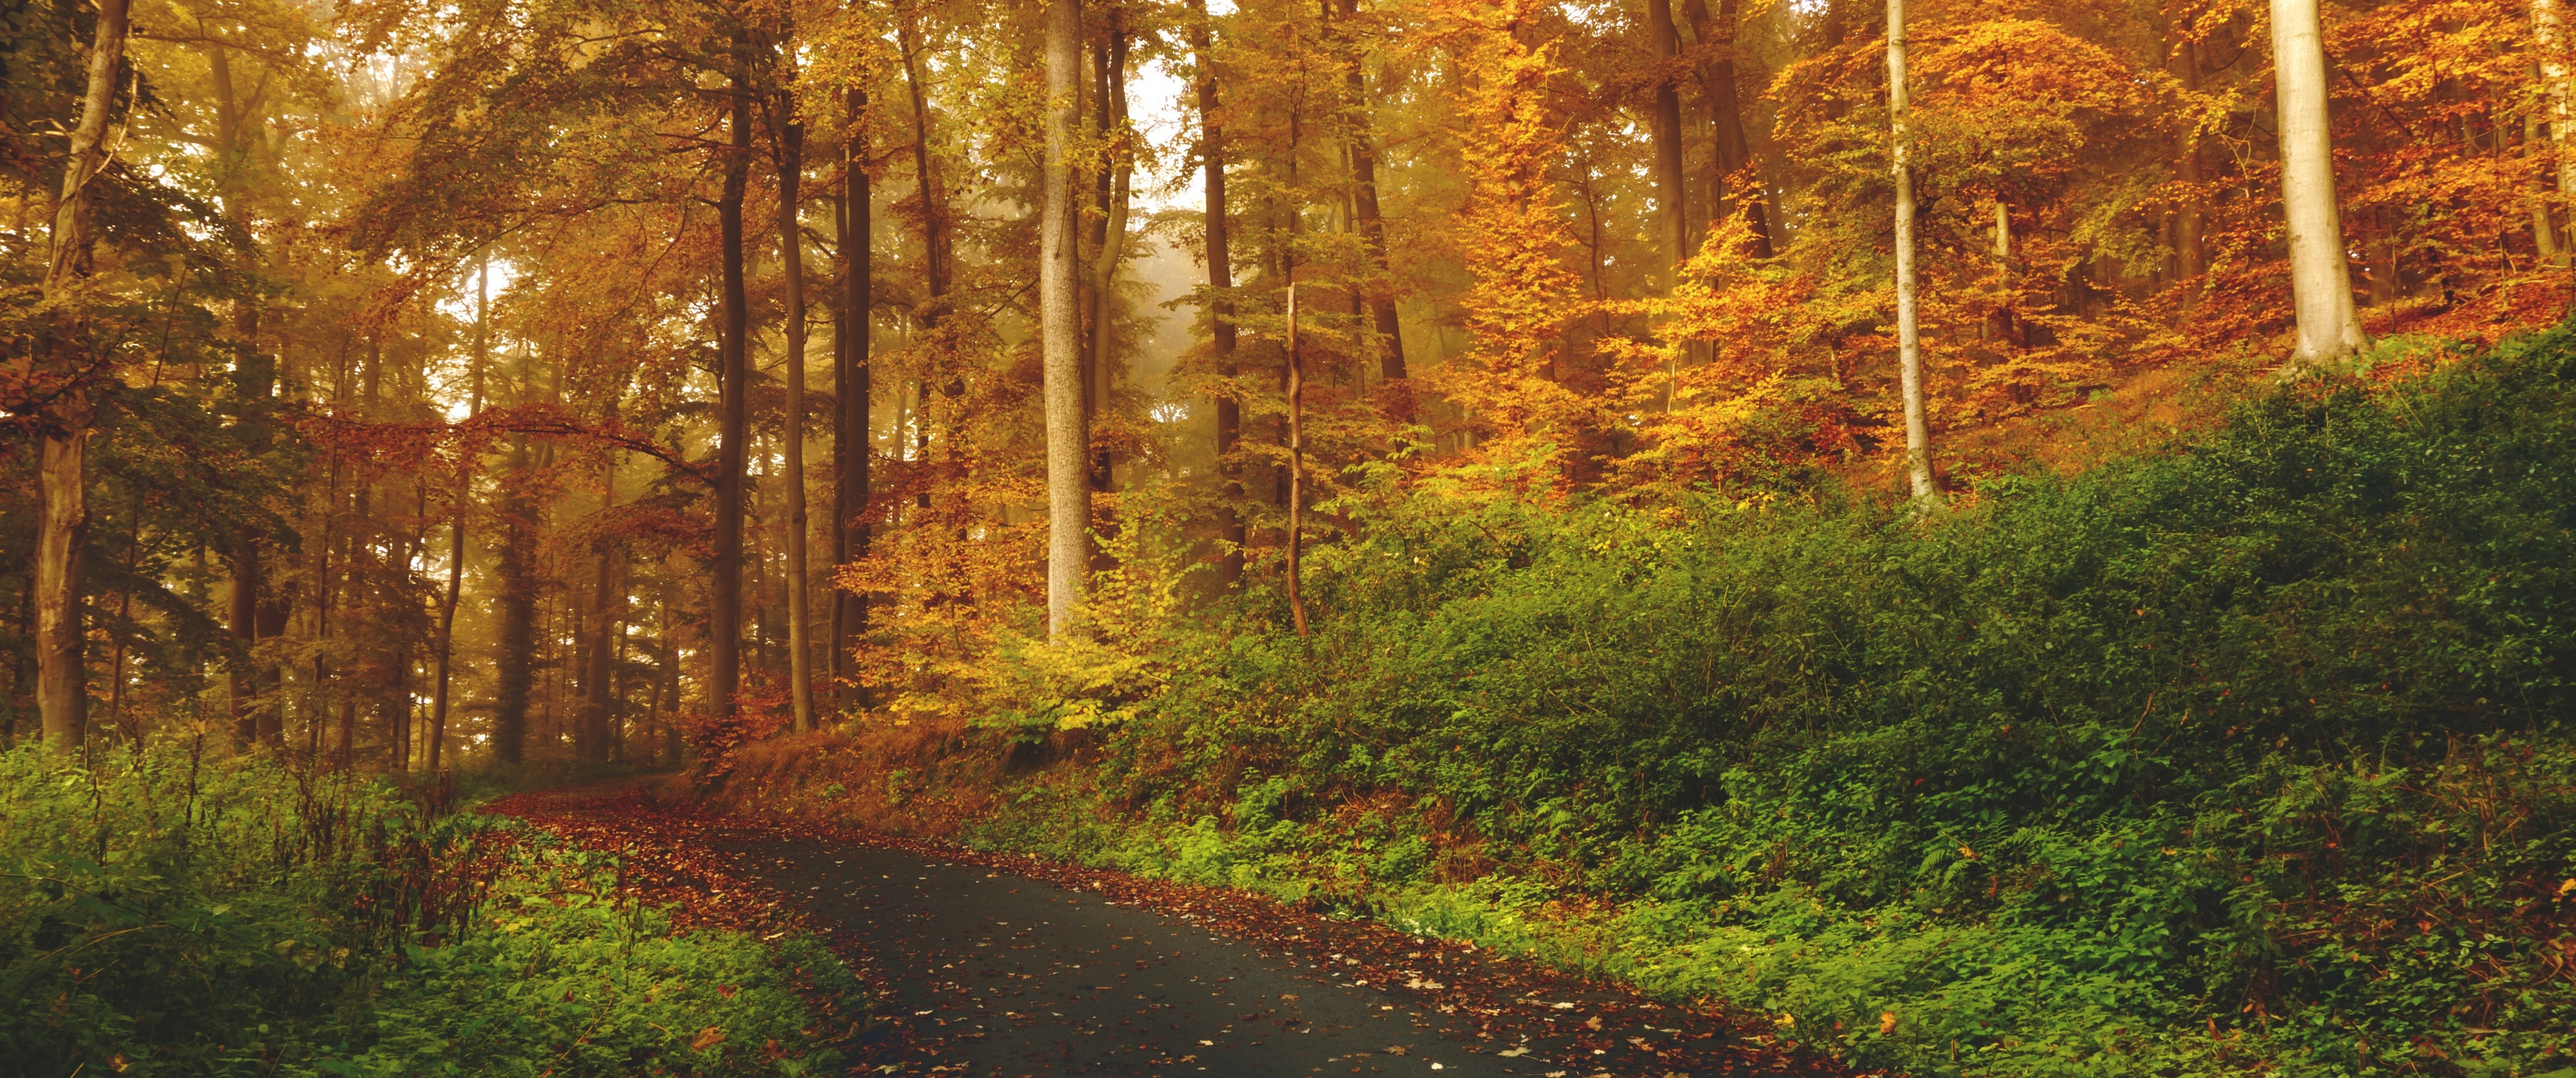 Autumn Wallpaper 4K, Path, Road, Foliage, Trees, Forest, Fall, 5K, Nature